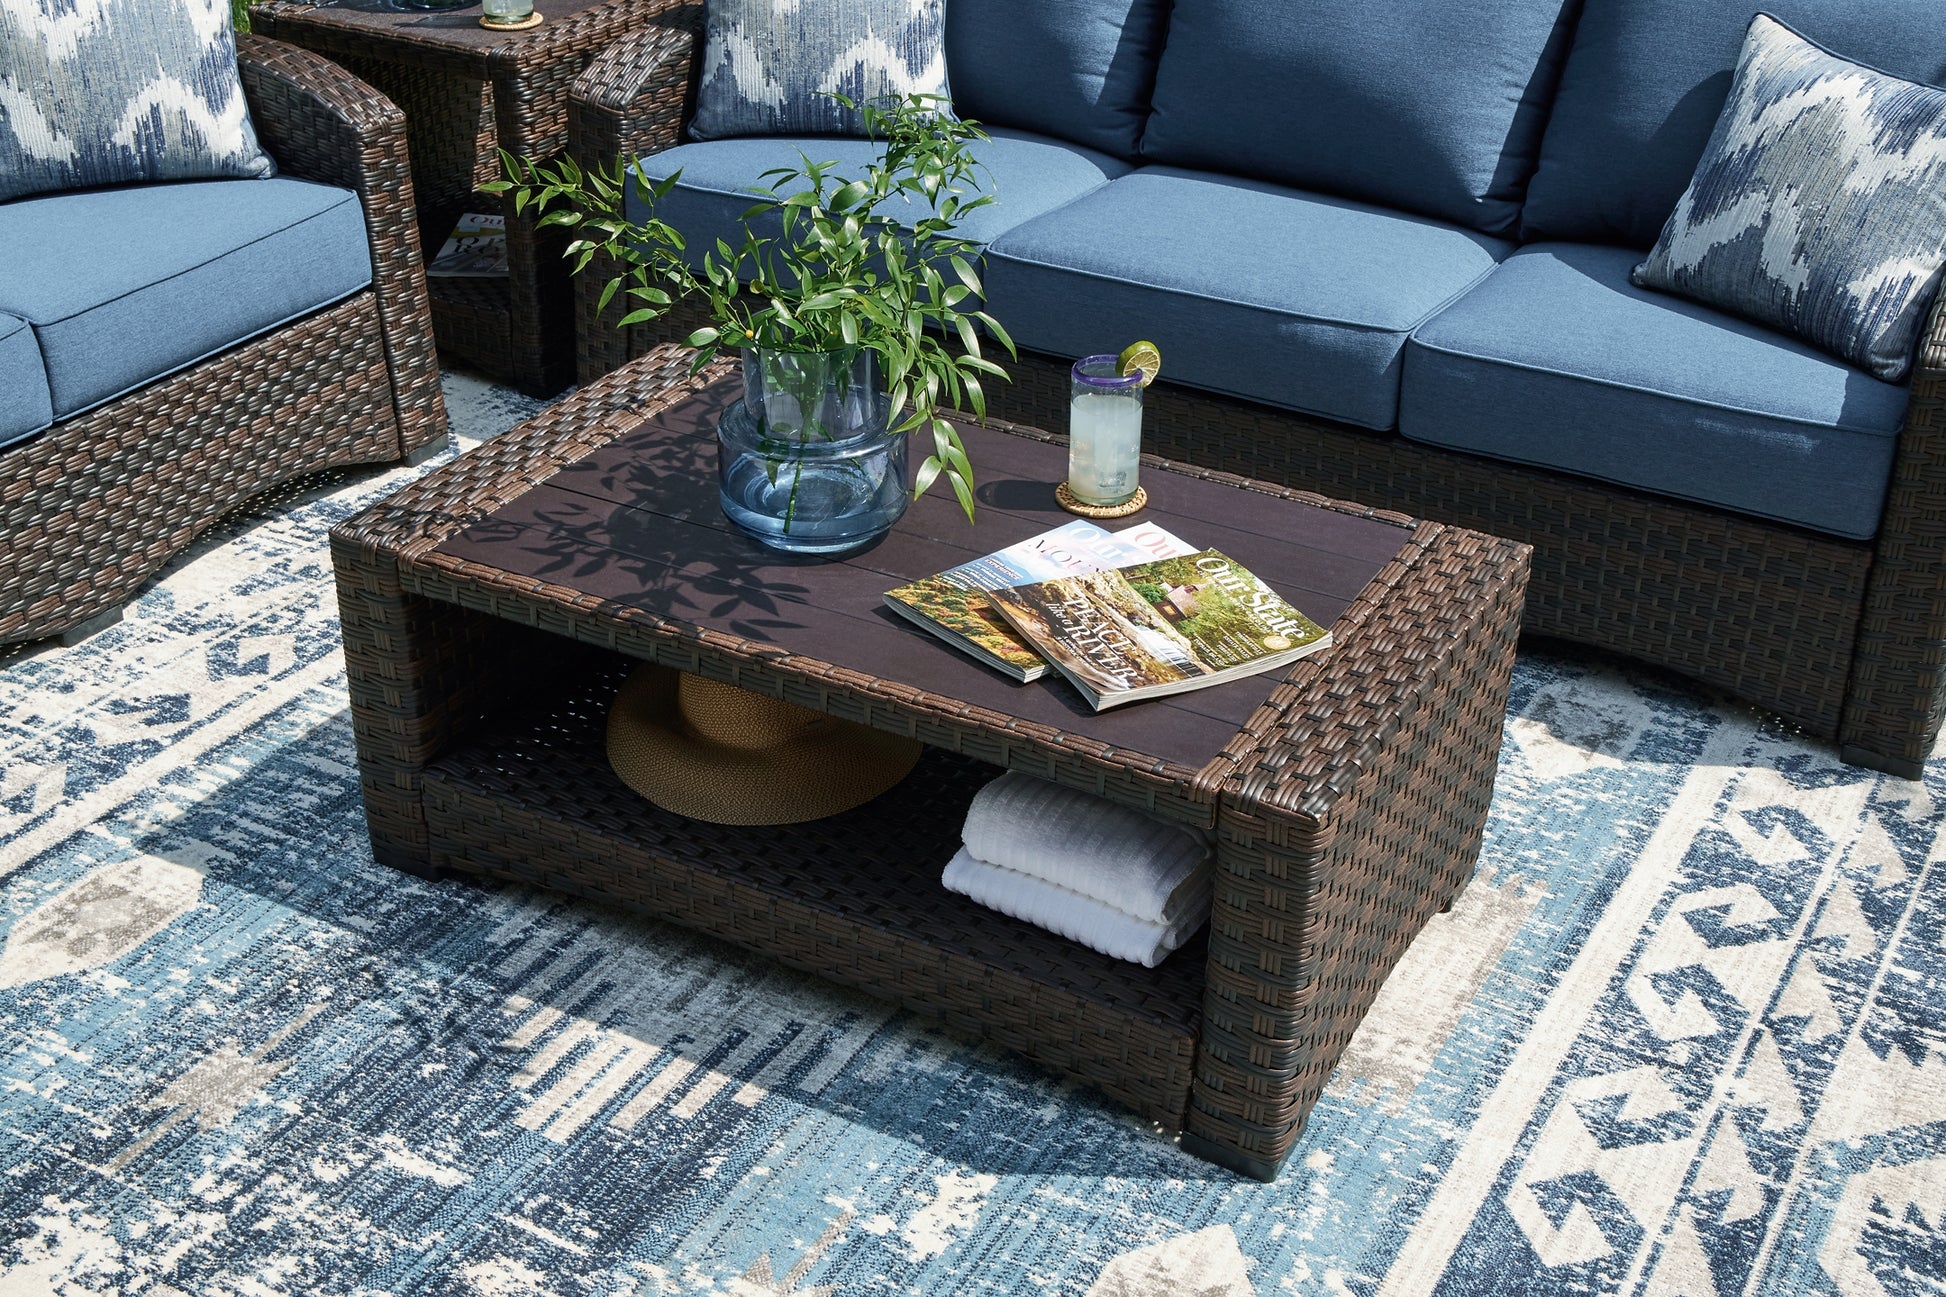 Windglow Outdoor Loveseat and 2 Chairs with Coffee Table Signature Design by Ashley®